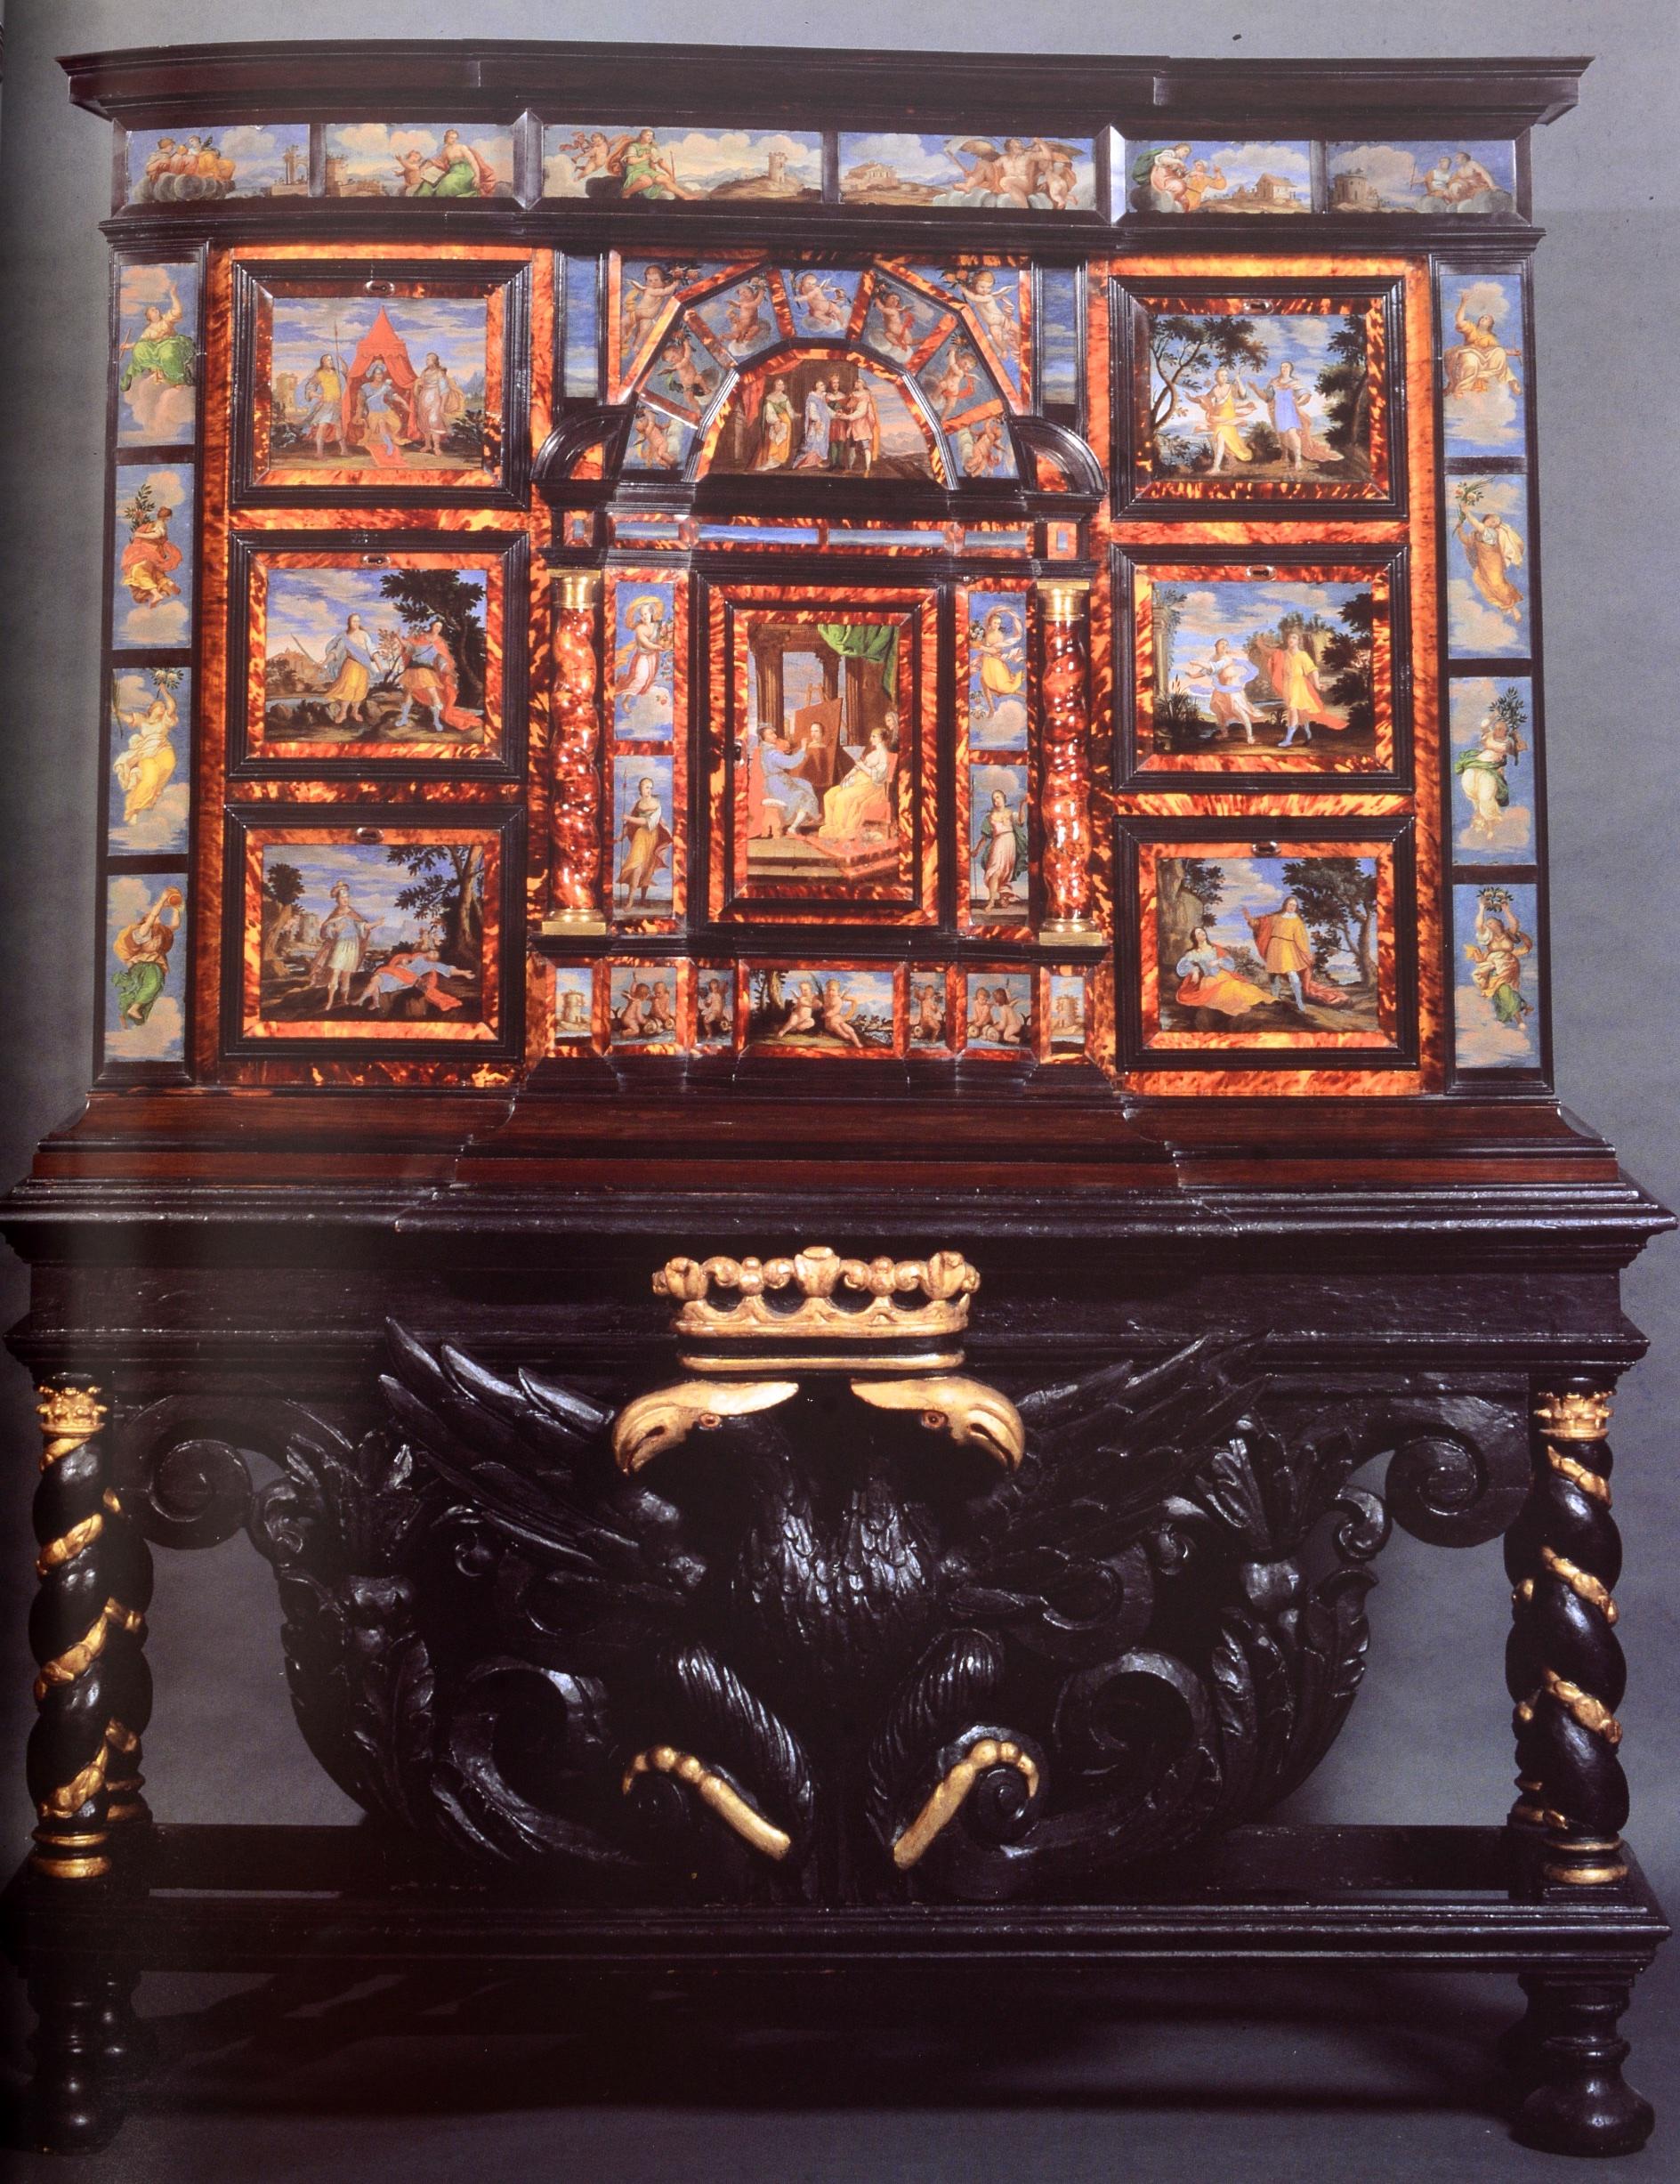 Pelham Galleries Ltd Dealers in Antiques & Works of Art, Catalog First Edition For Sale 11